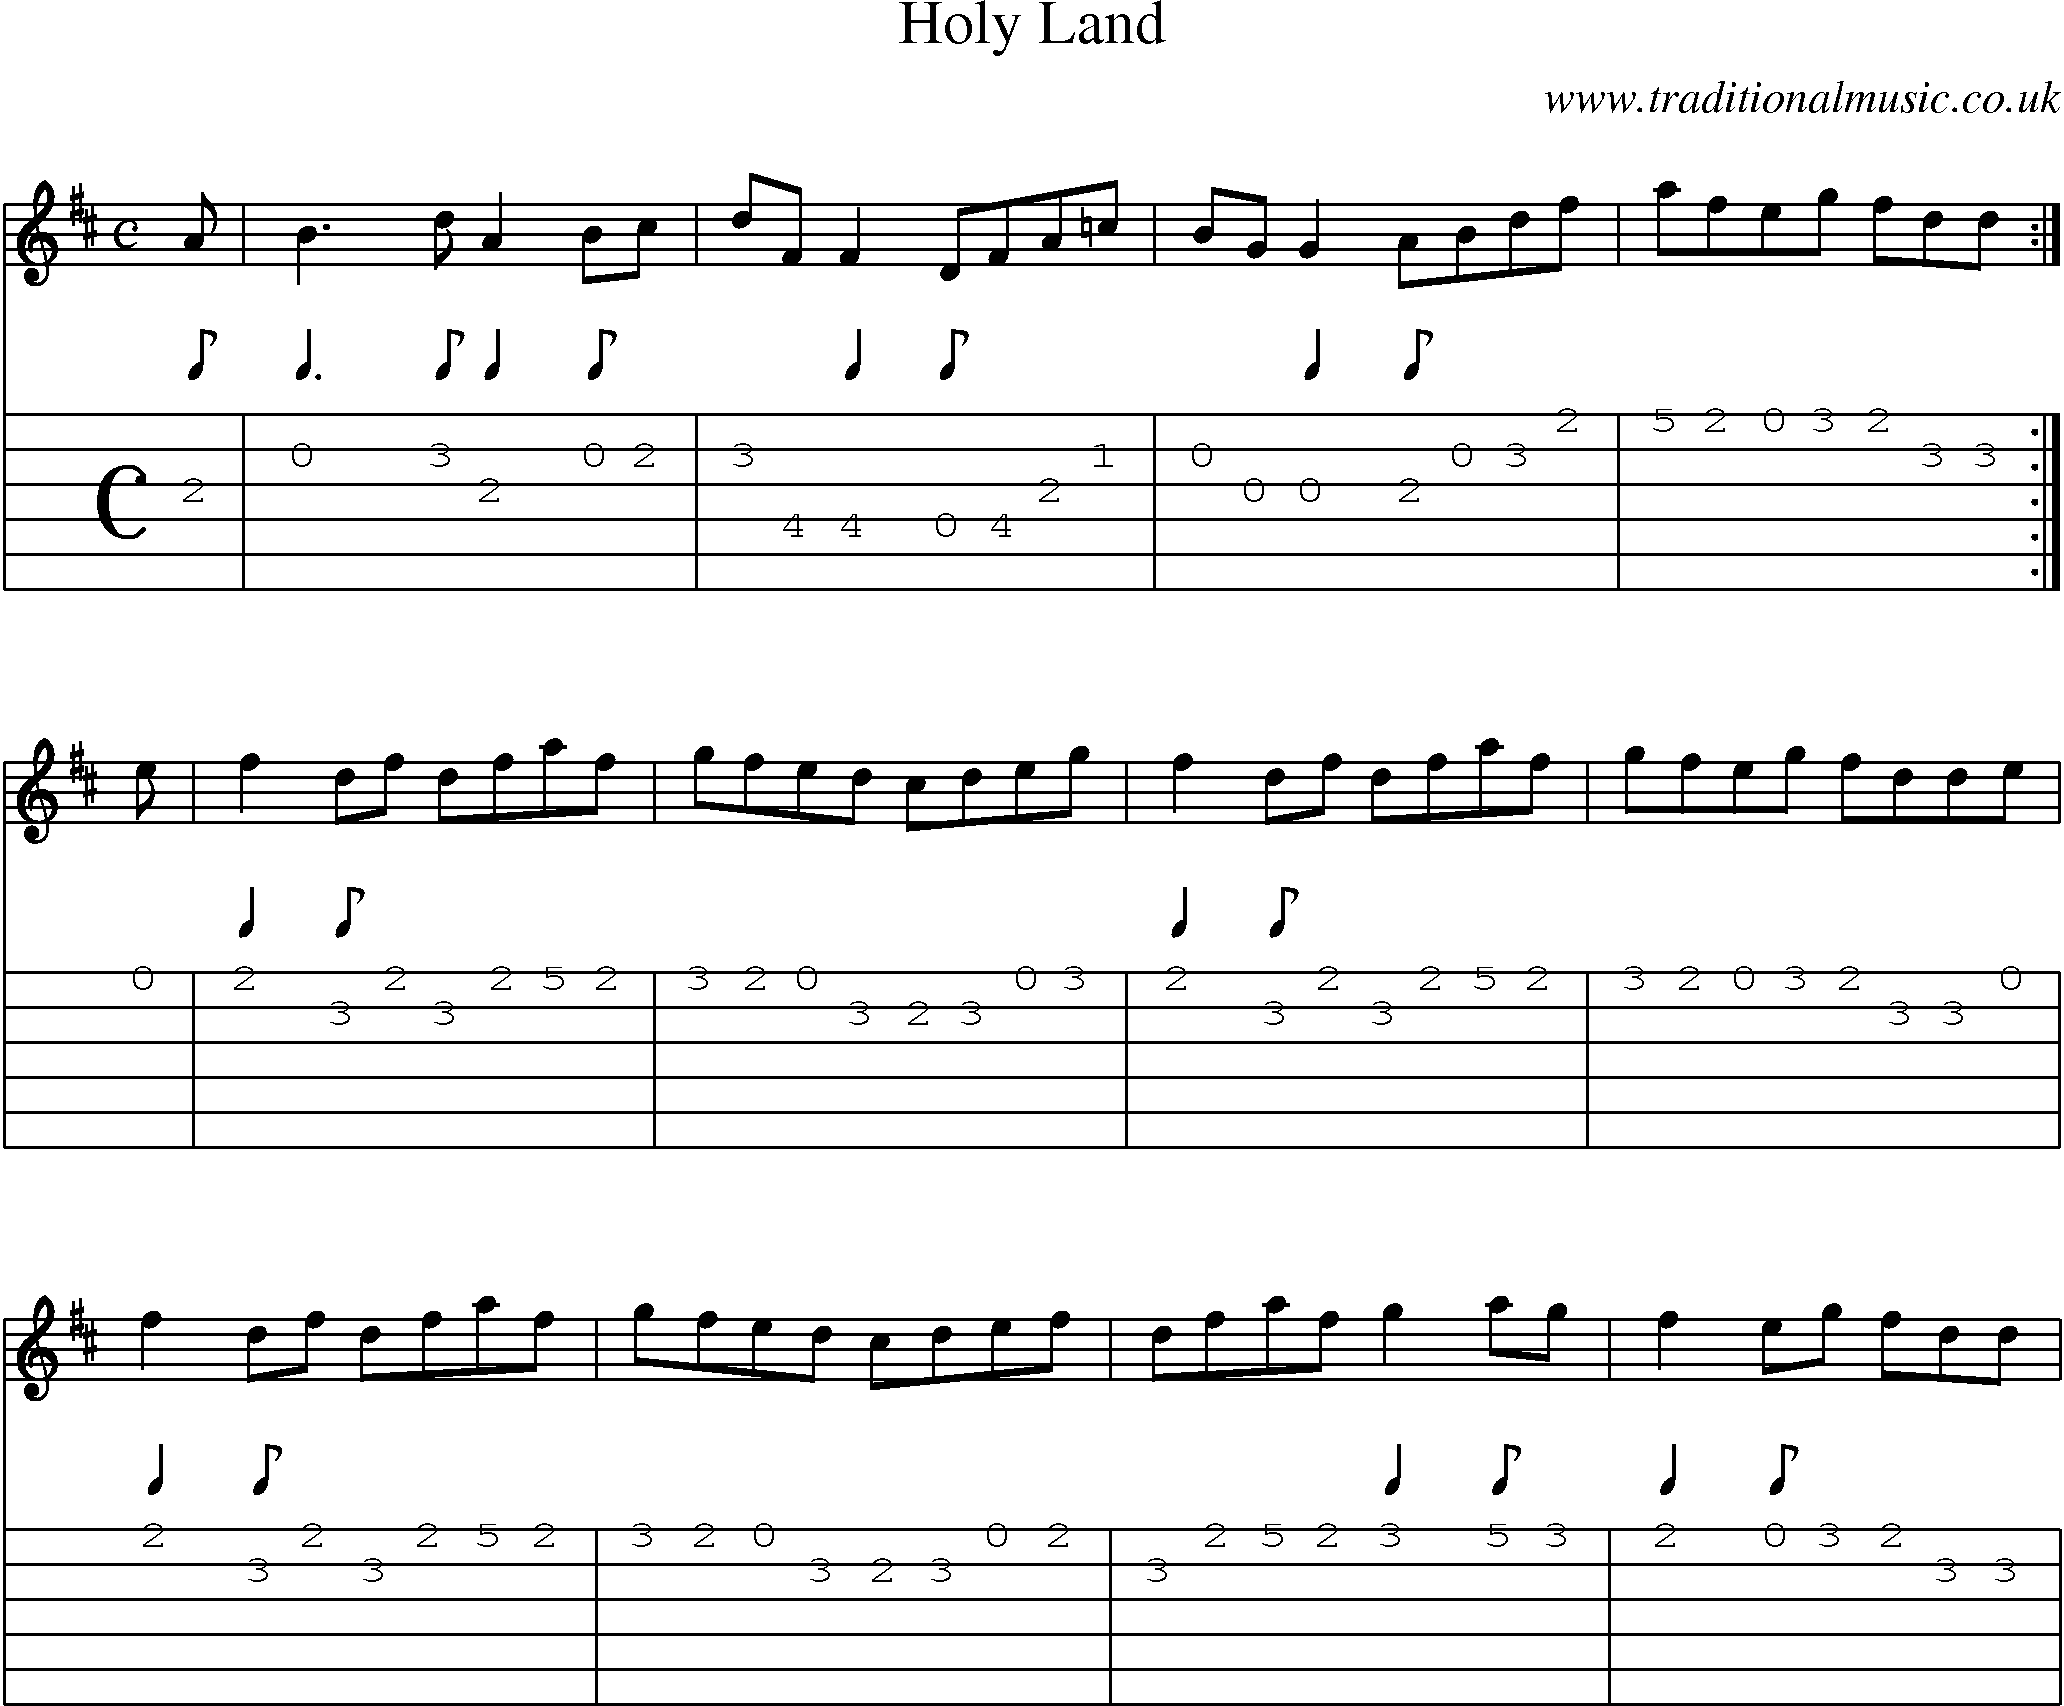 Music Score and Guitar Tabs for Holy Land